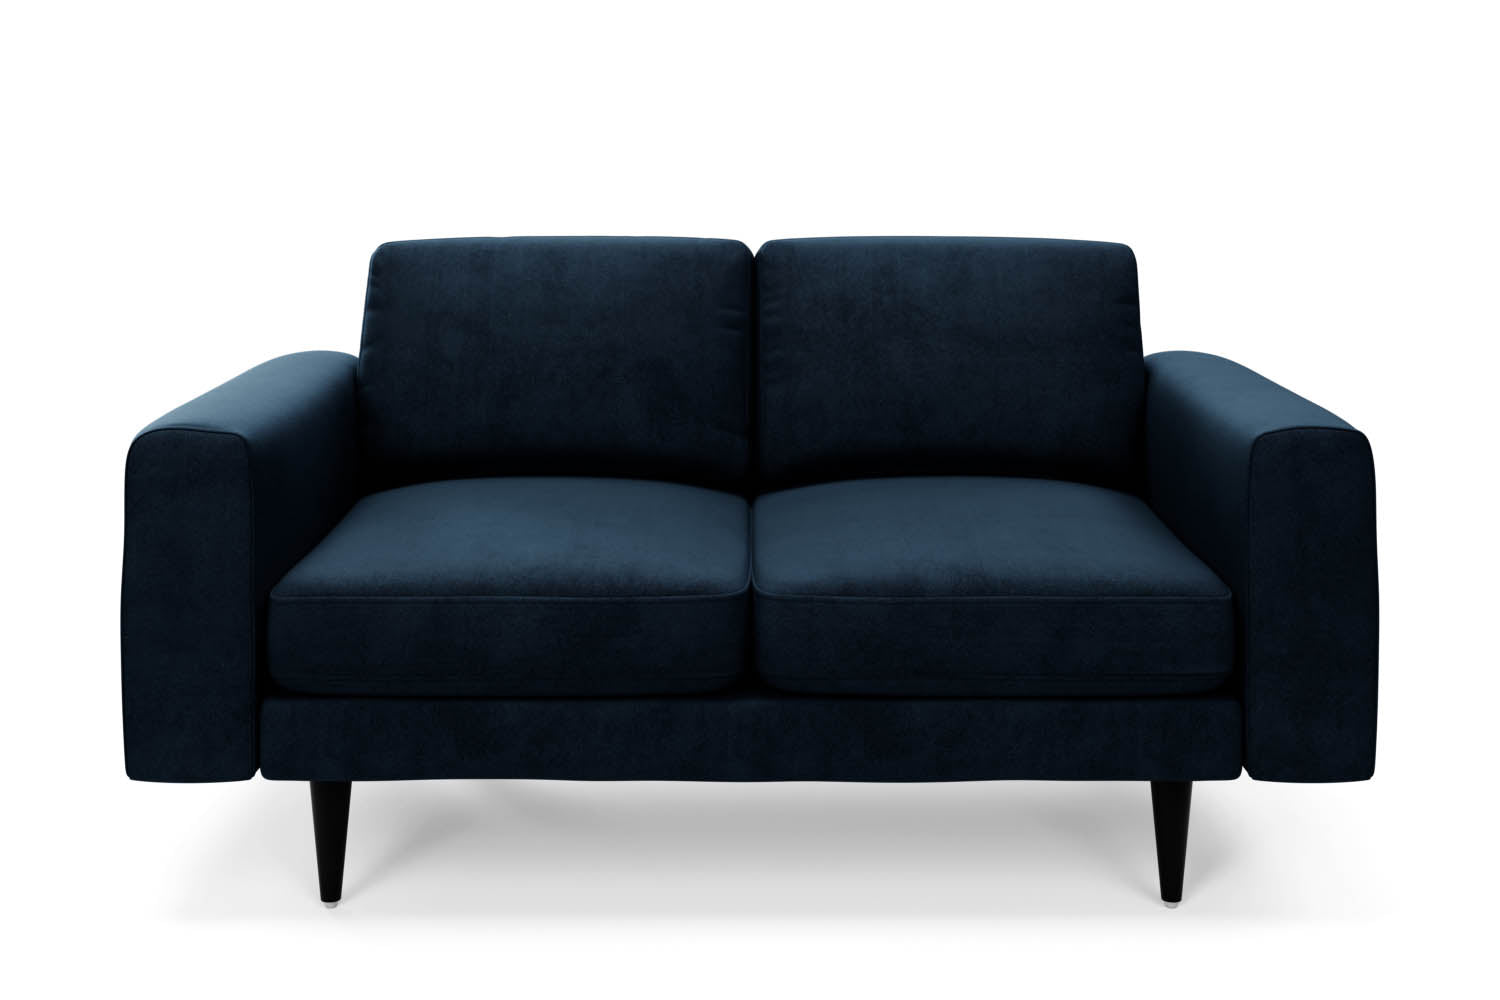 SNUG | The Big Chill 2 Seater Sofa in Deep Blue variant_40837173411888